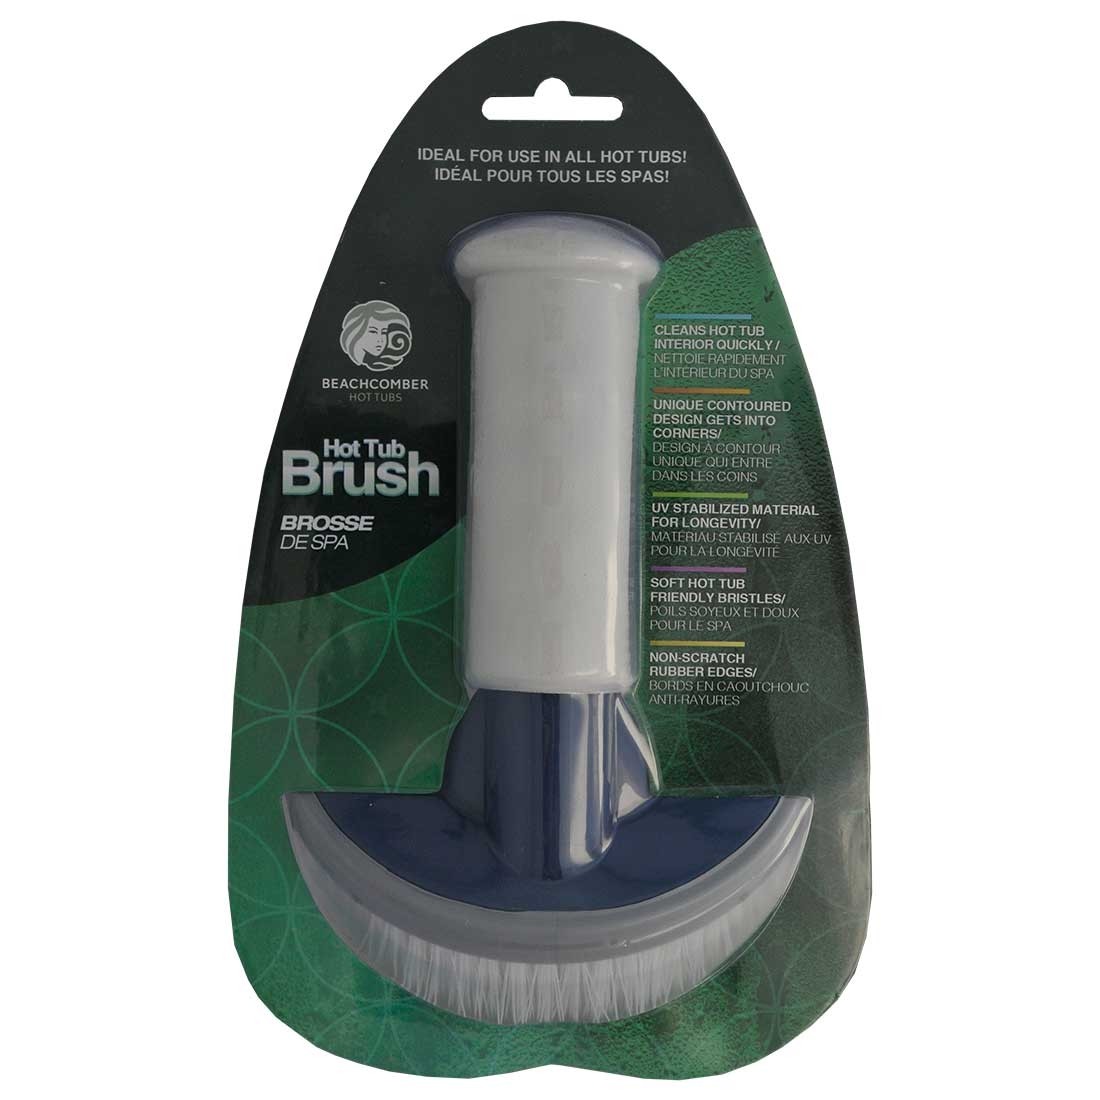 Beachcomber Hot Tub Brush For Cleaning